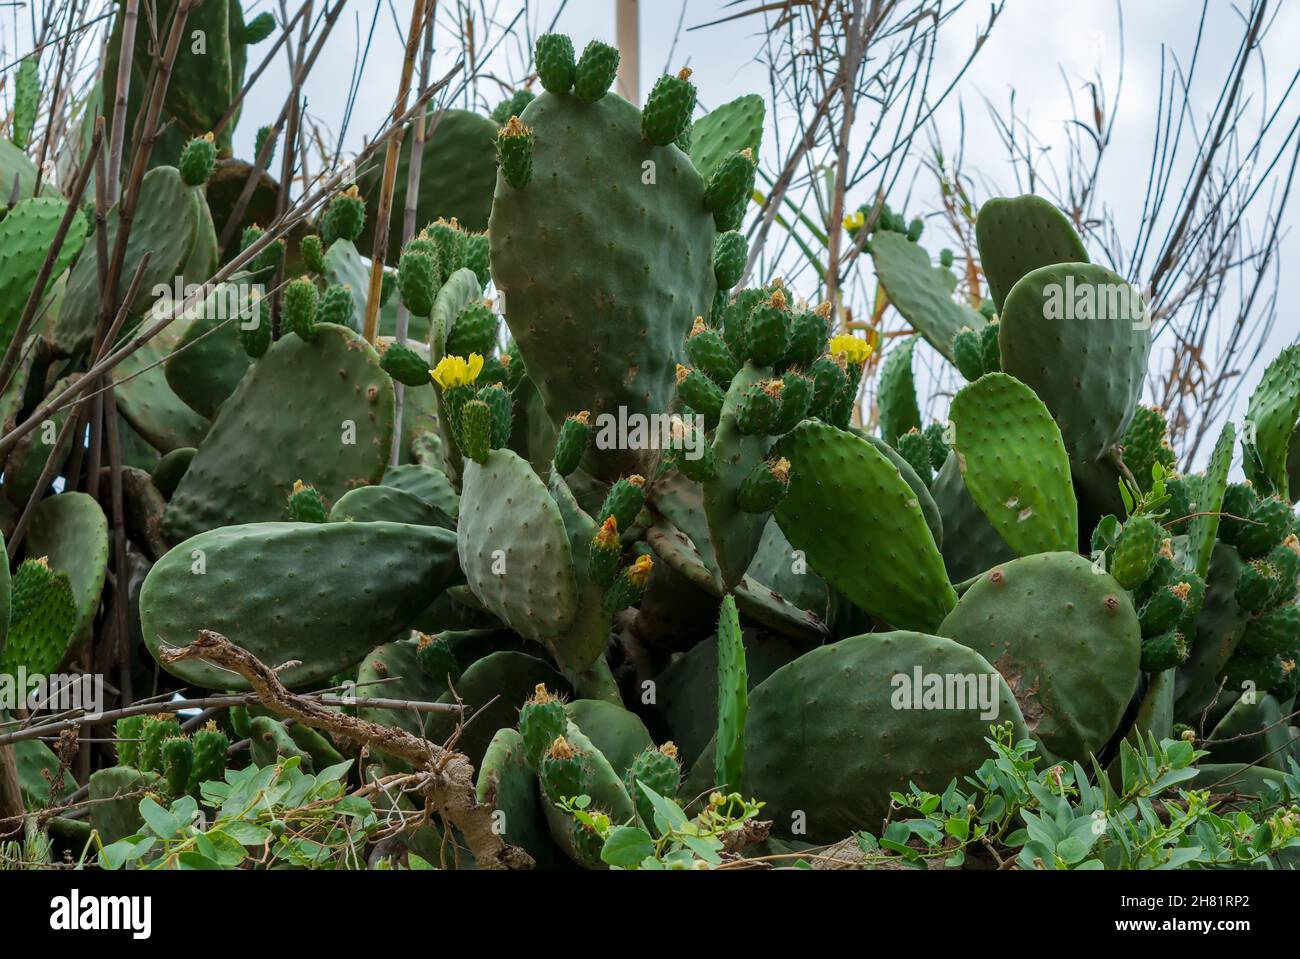 Opuntia, commonly called prickly pear, in Qrendi, Malta, with yellow flowers and green fruits. Opuntia is a genus in the cactus family, Cactaceae. Stock Photo